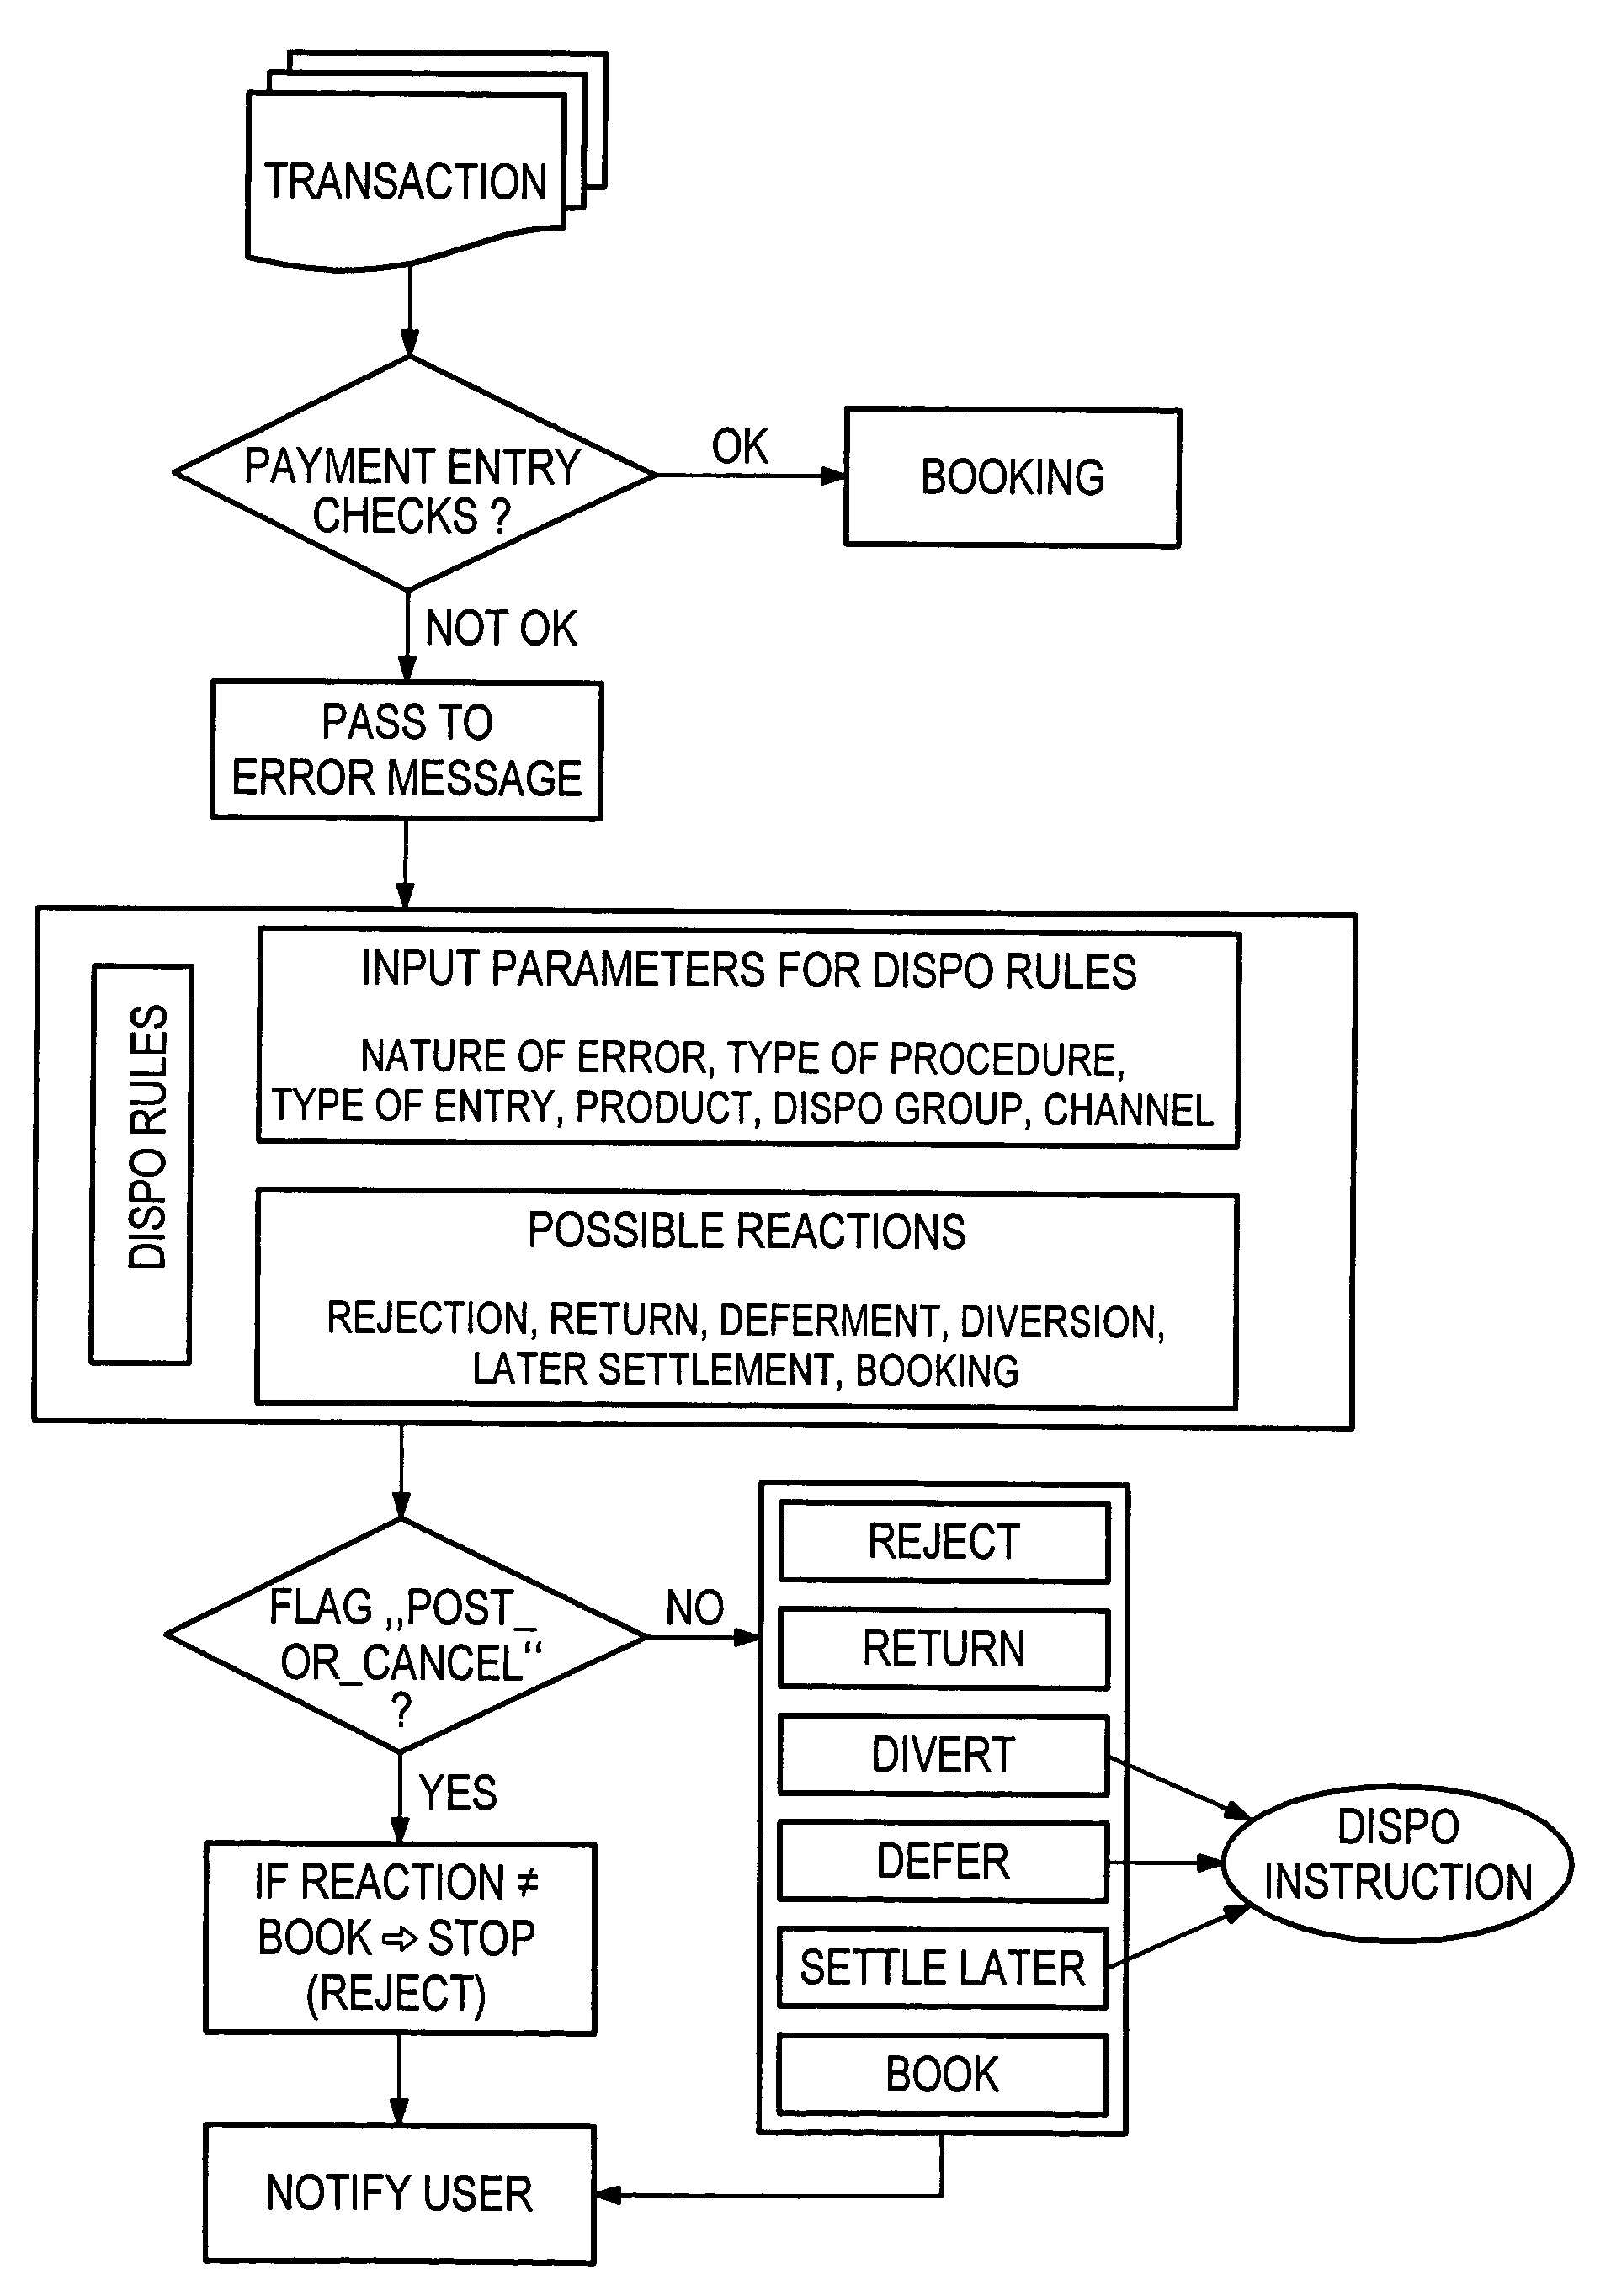 Method and apparatus for computer-implemented processing of payment entries